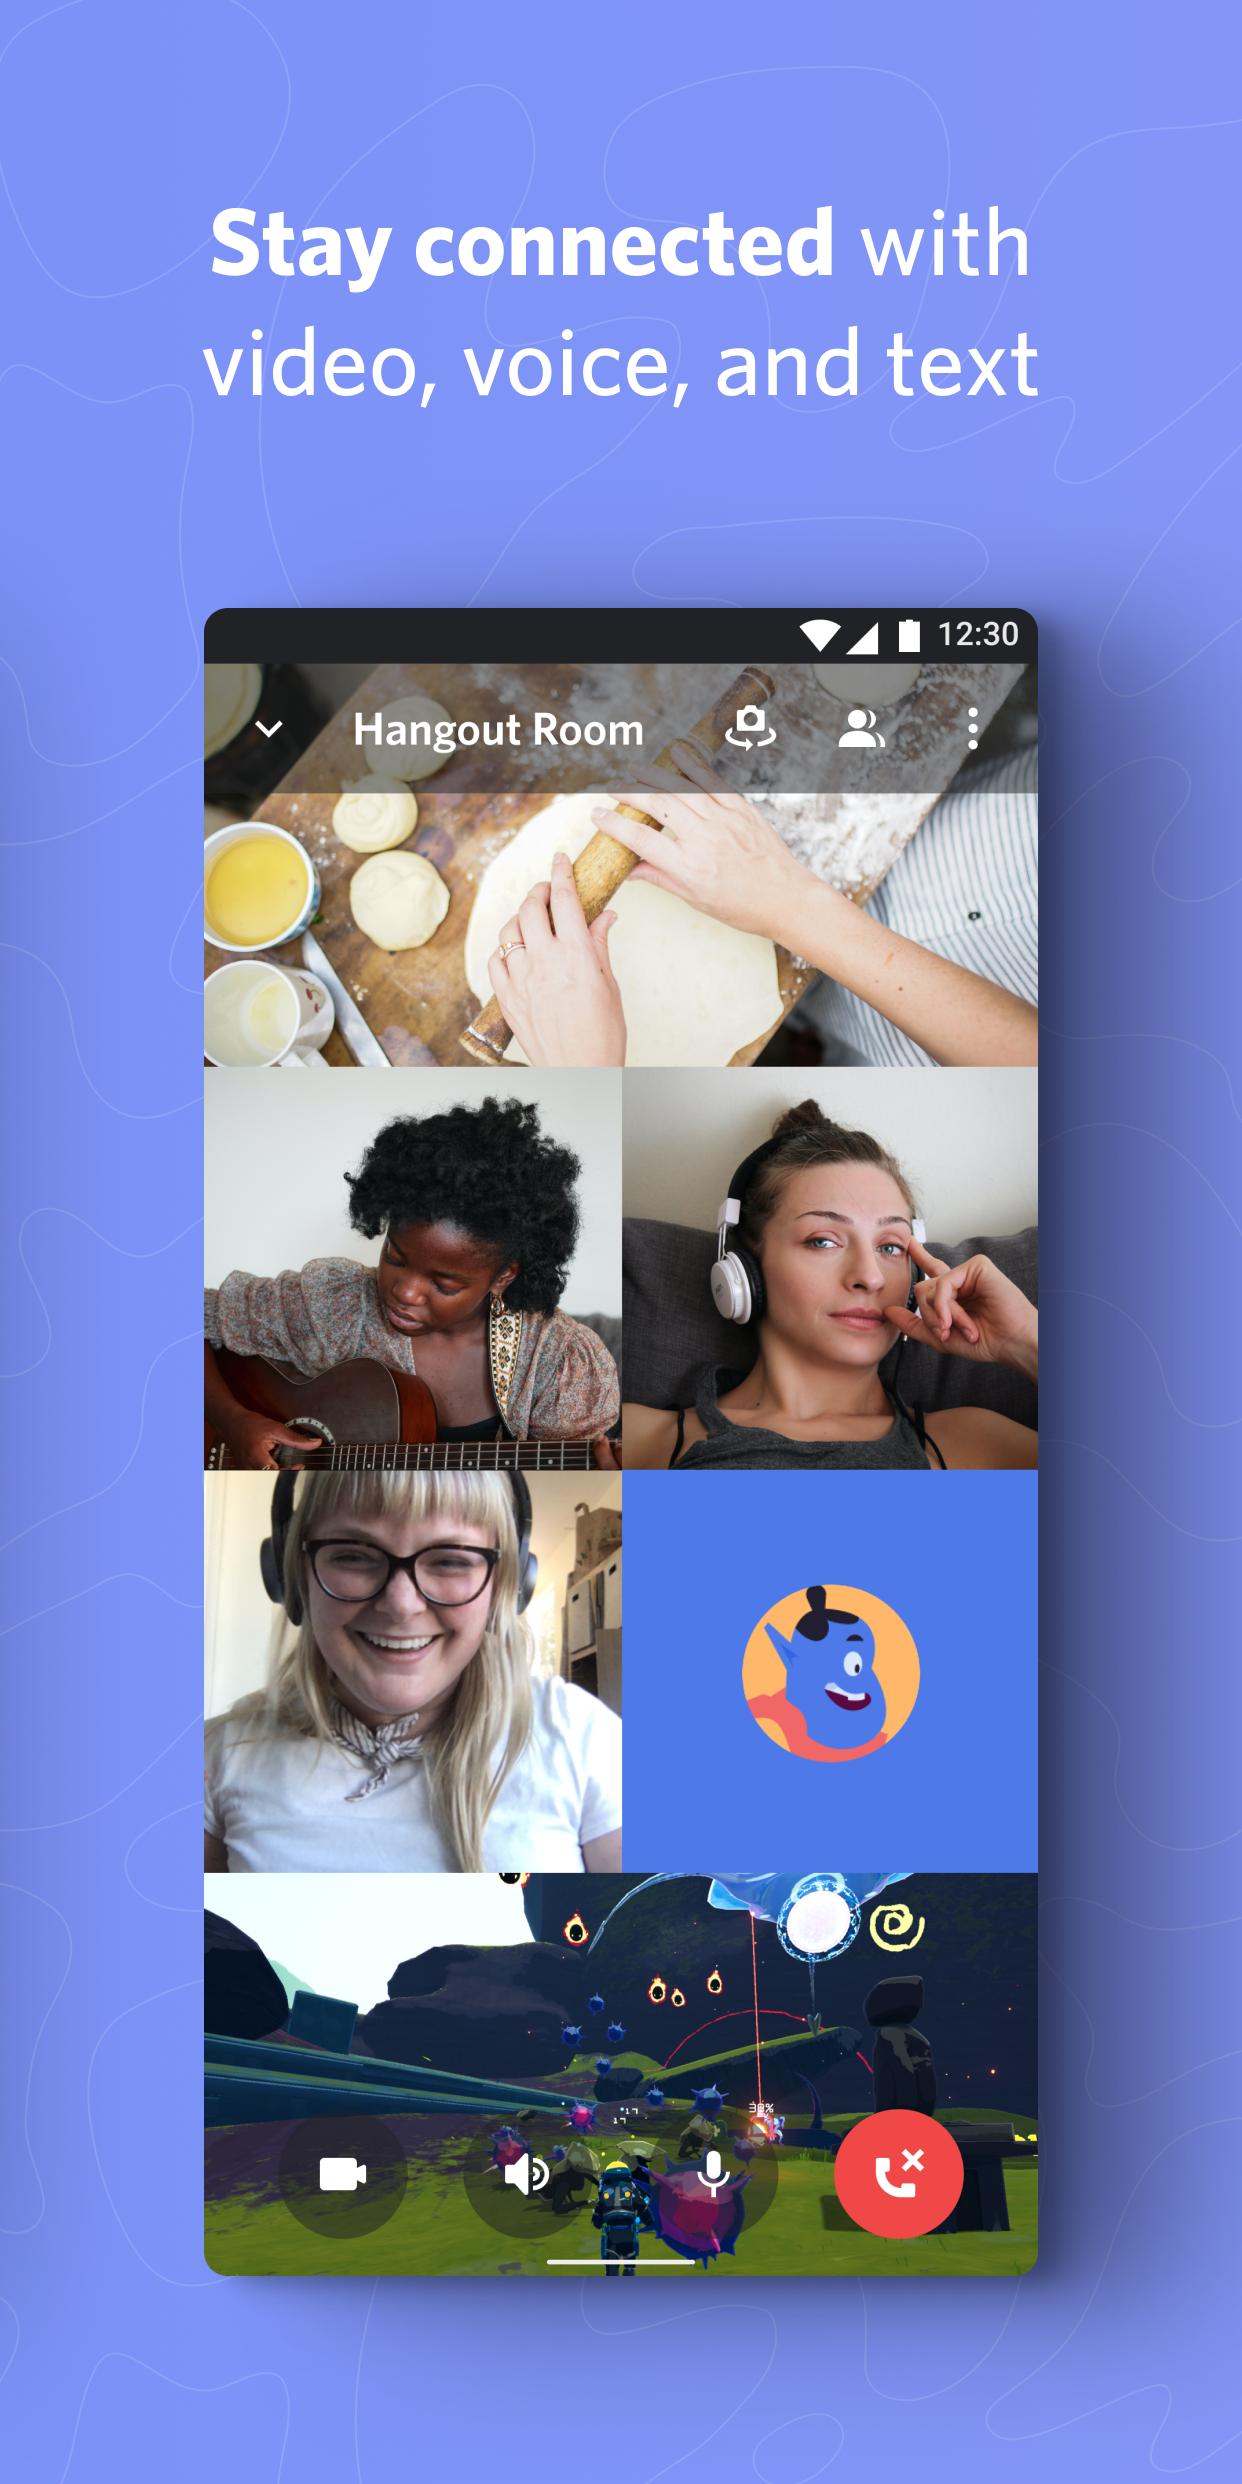 Discord Talk, Video Chat & Hang Out with Friends 50.2 Screenshot 2